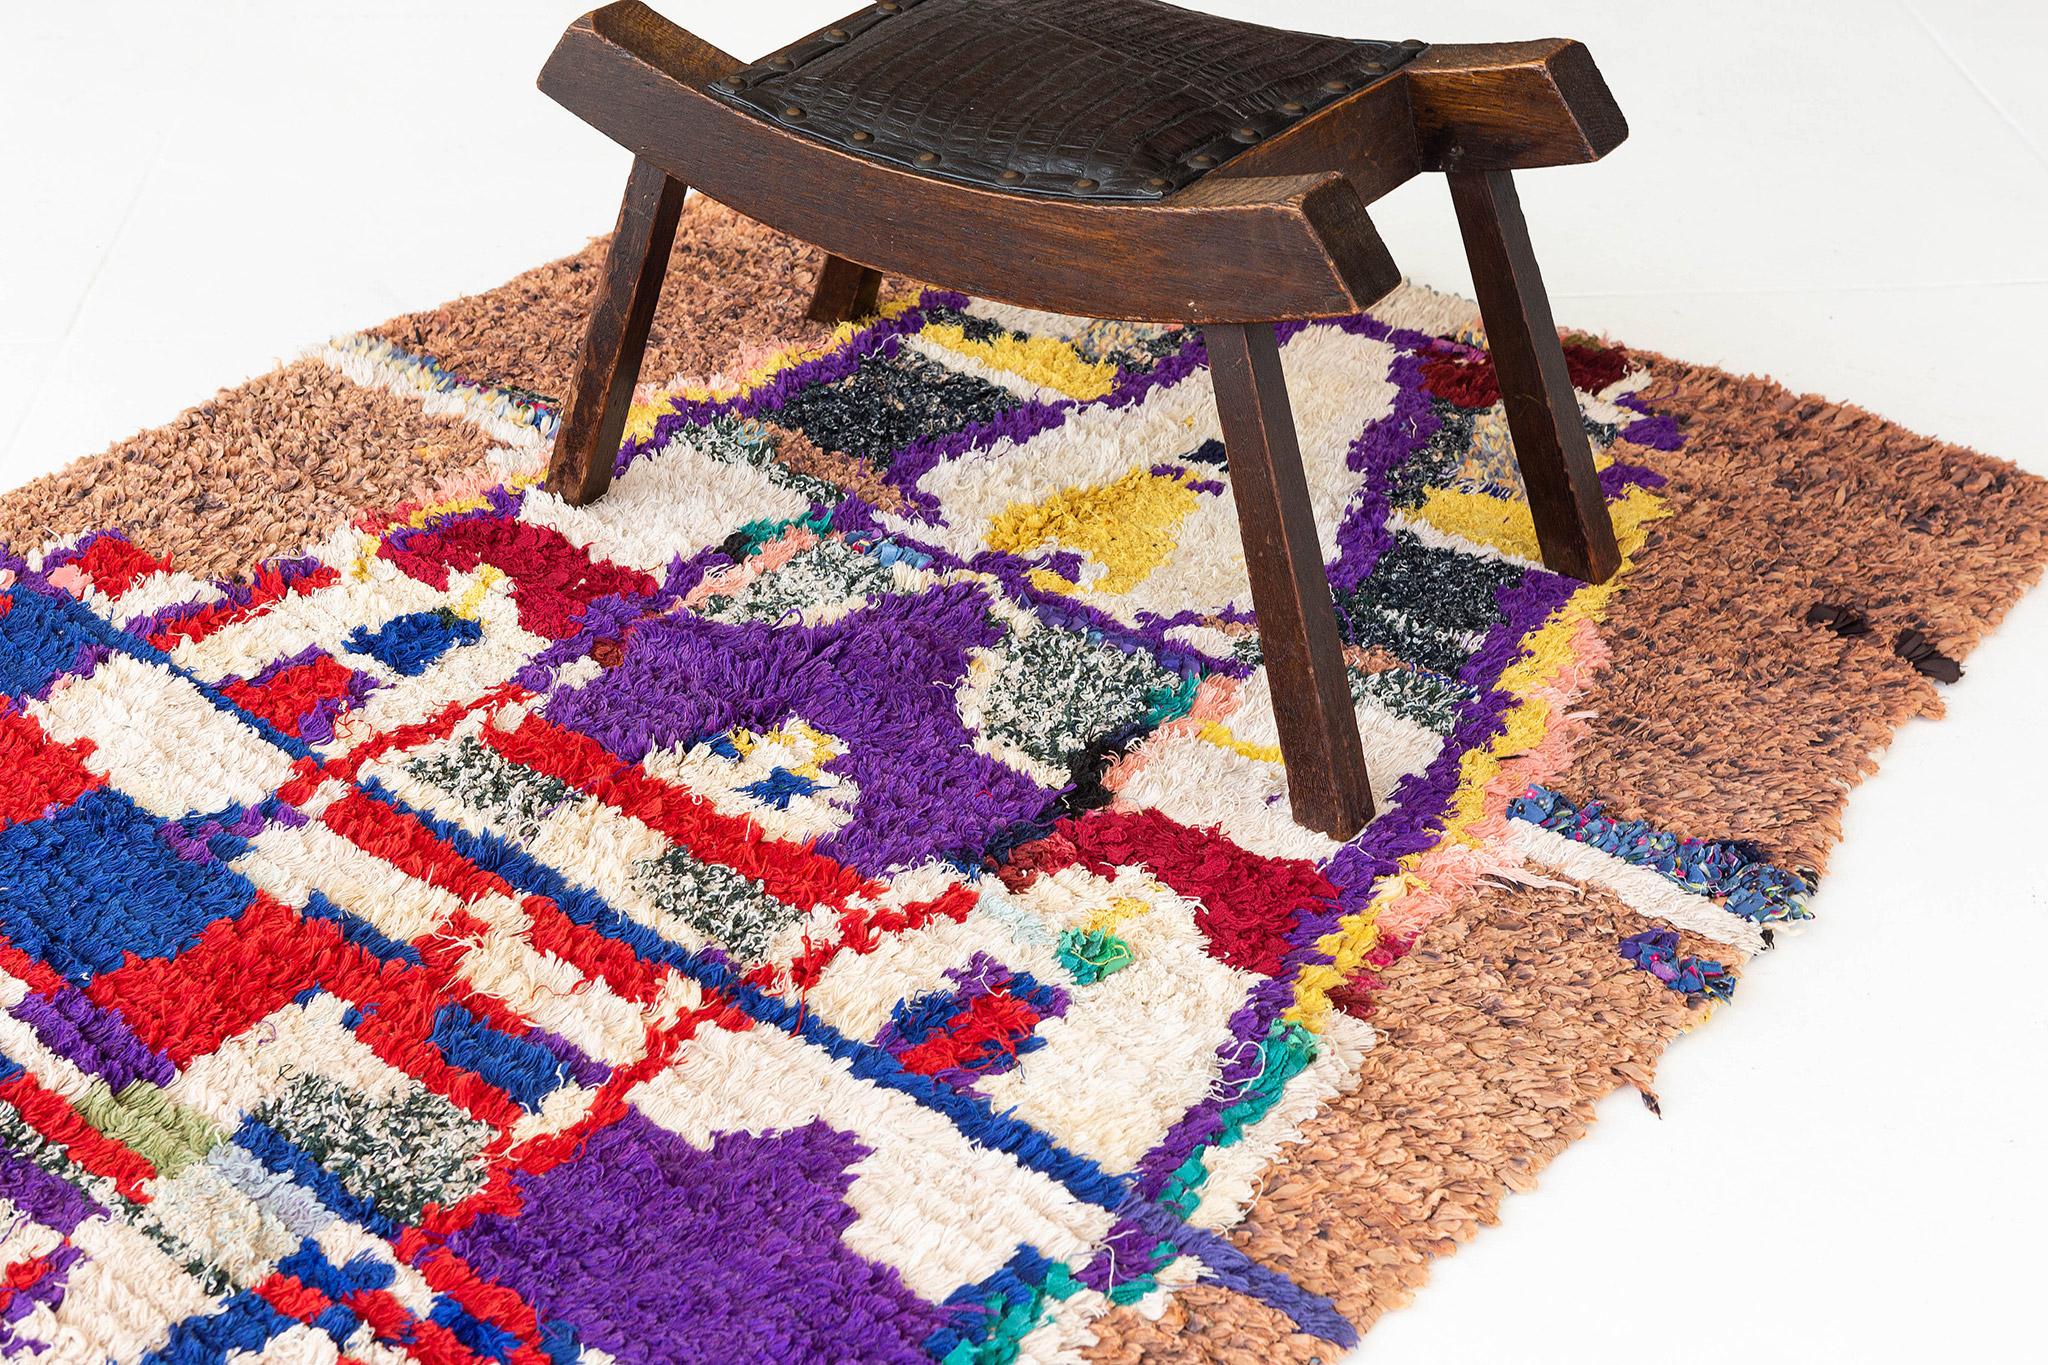 A rug like a painting! A white shape area seems to emerge from a ground plane at the bottom of the rugwith . It is filled with multi-colored shape elements of purple, red, blue and yellow. A variegated brown and clay-colored field suggests